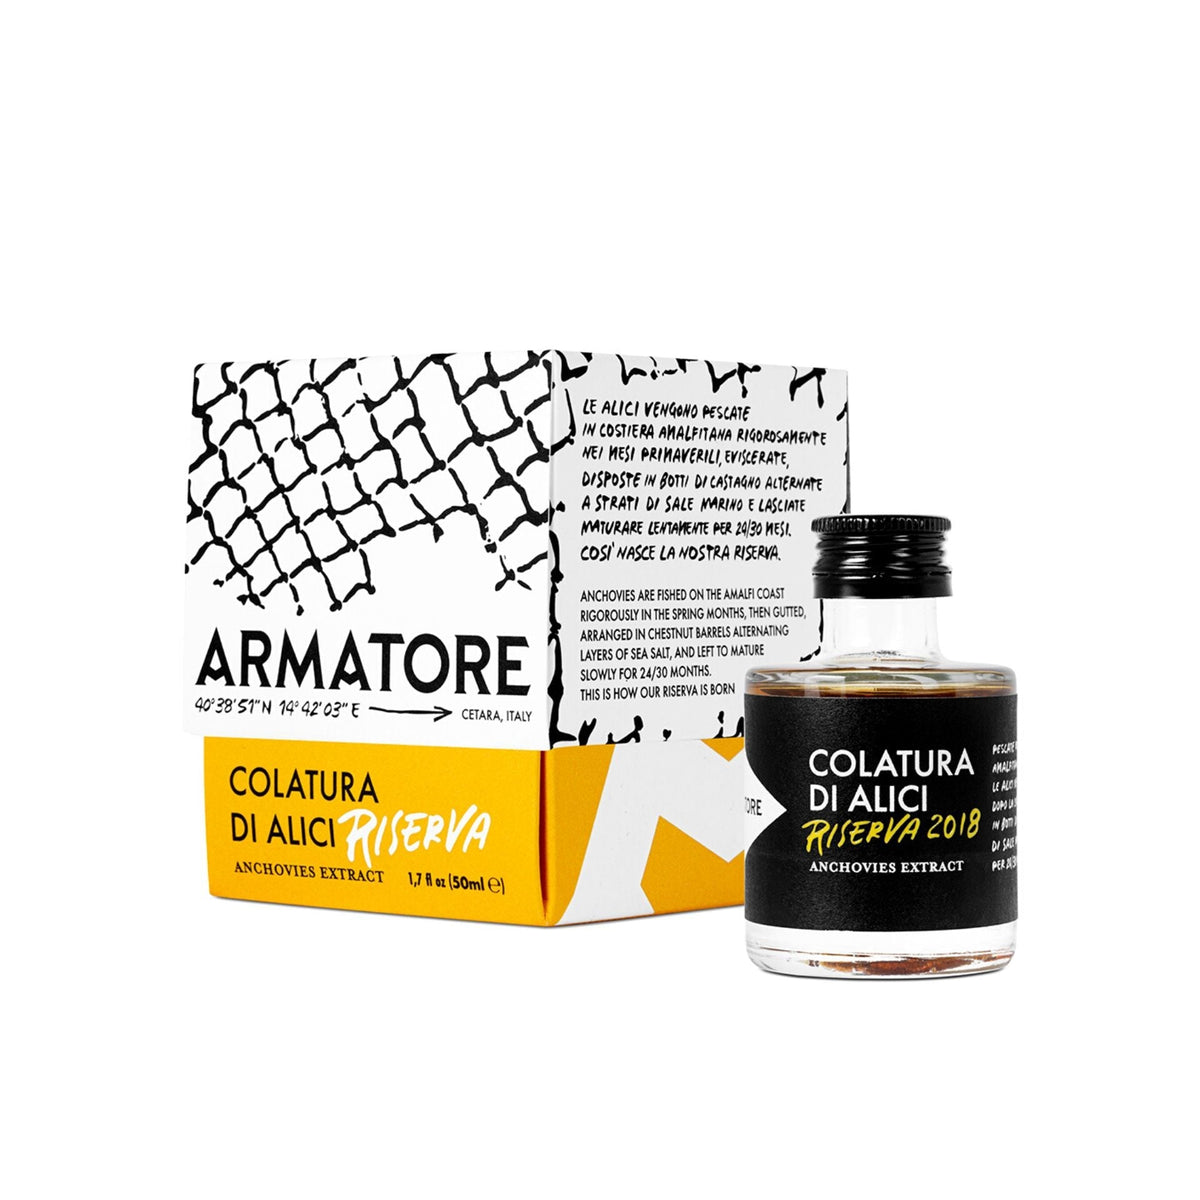 Armatore Cetara Colatura Anchovies Extract Reserve 50ml  | Imported and distributed in the UK by Just Gourmet Foods